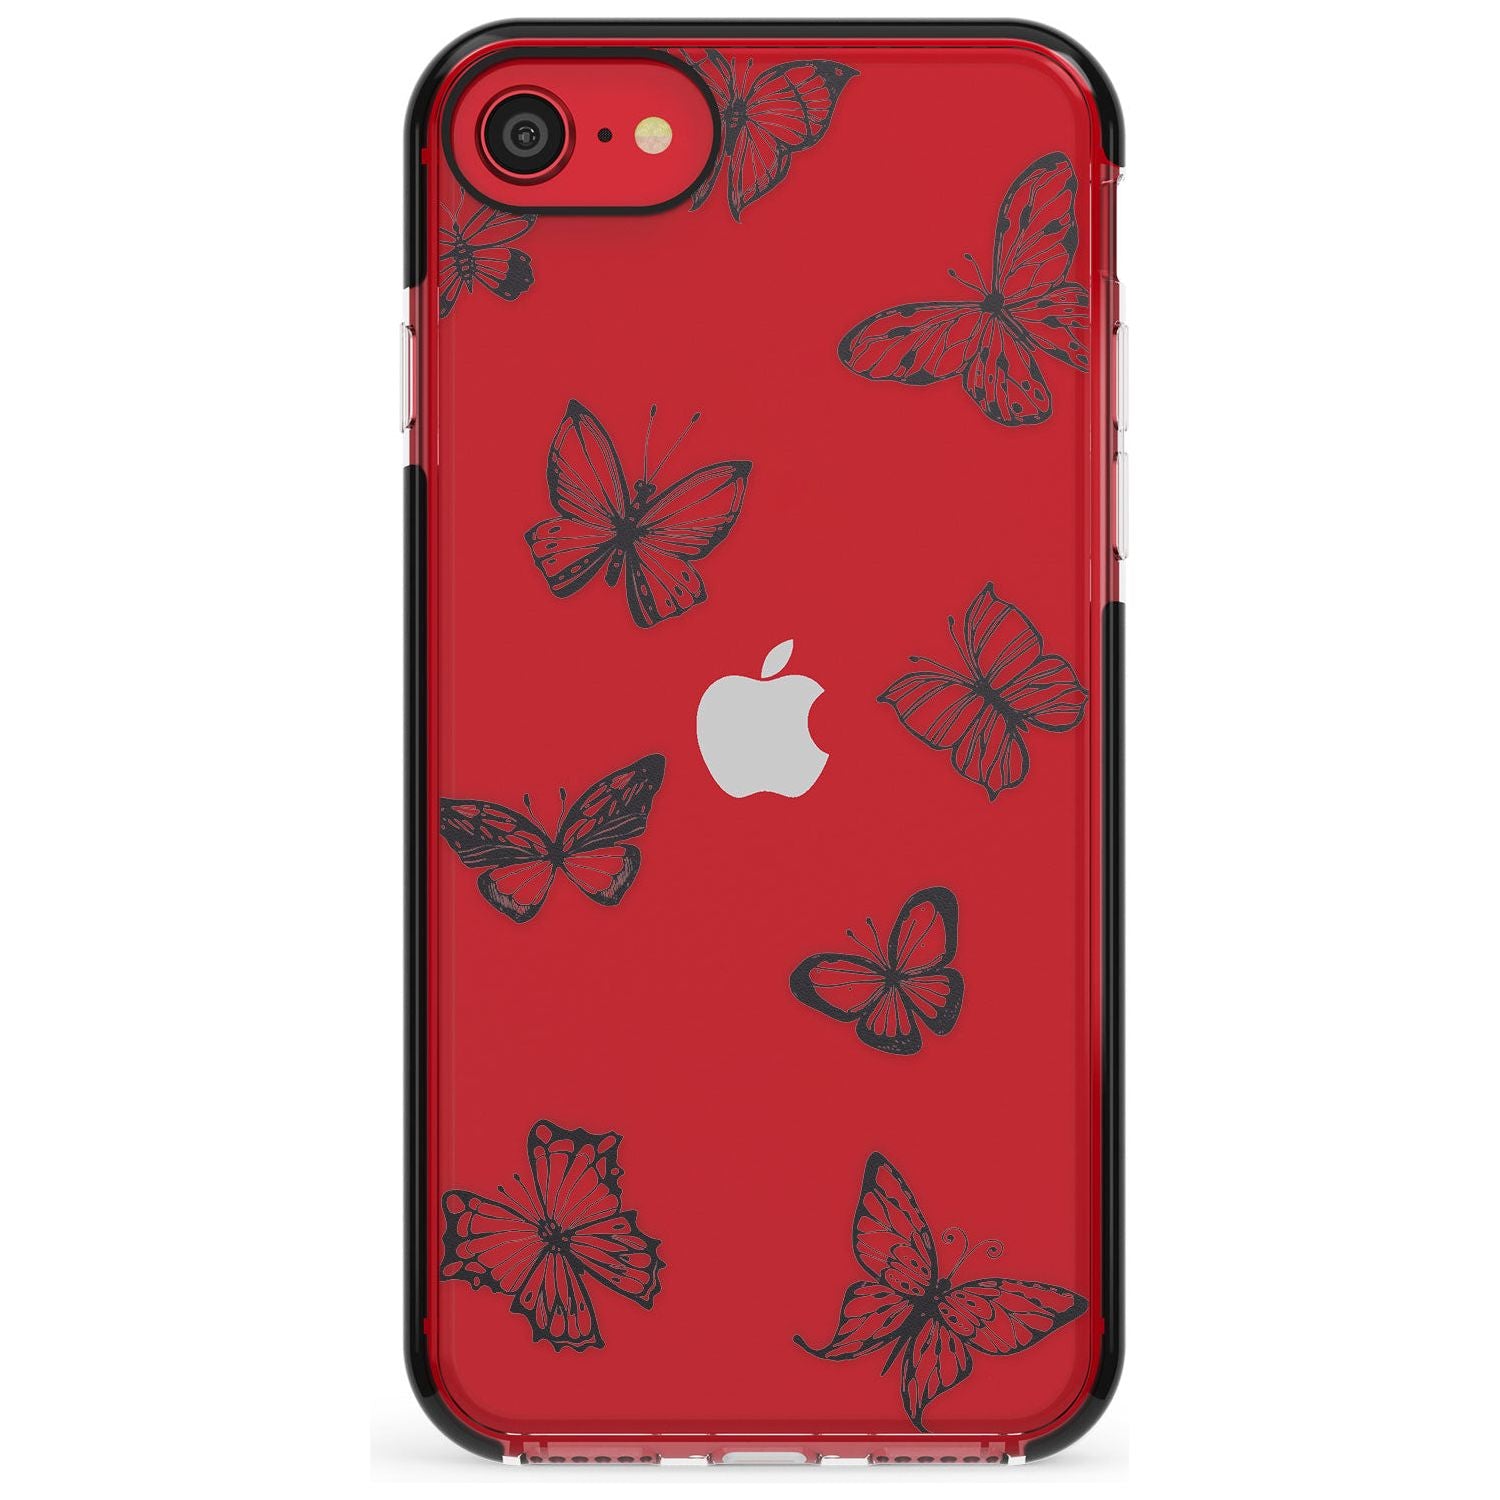 Grey Butterfly Line Pattern Black Impact Phone Case for iPhone SE 8 7 Plus